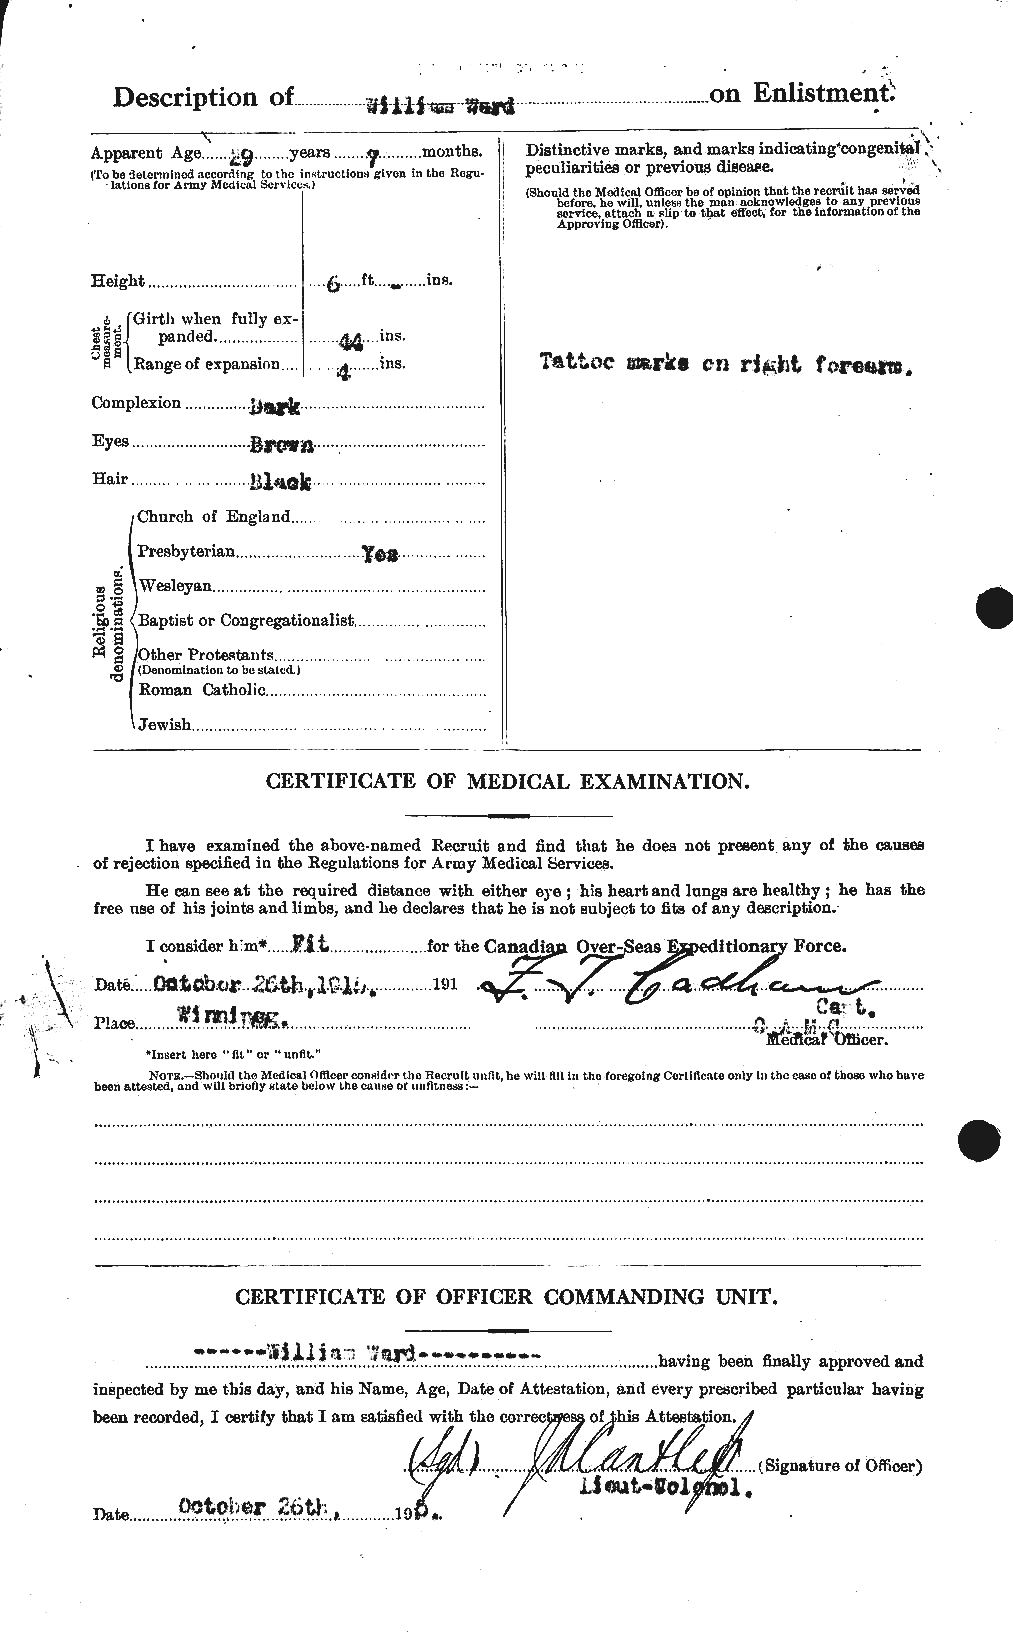 Personnel Records of the First World War - CEF 659791b